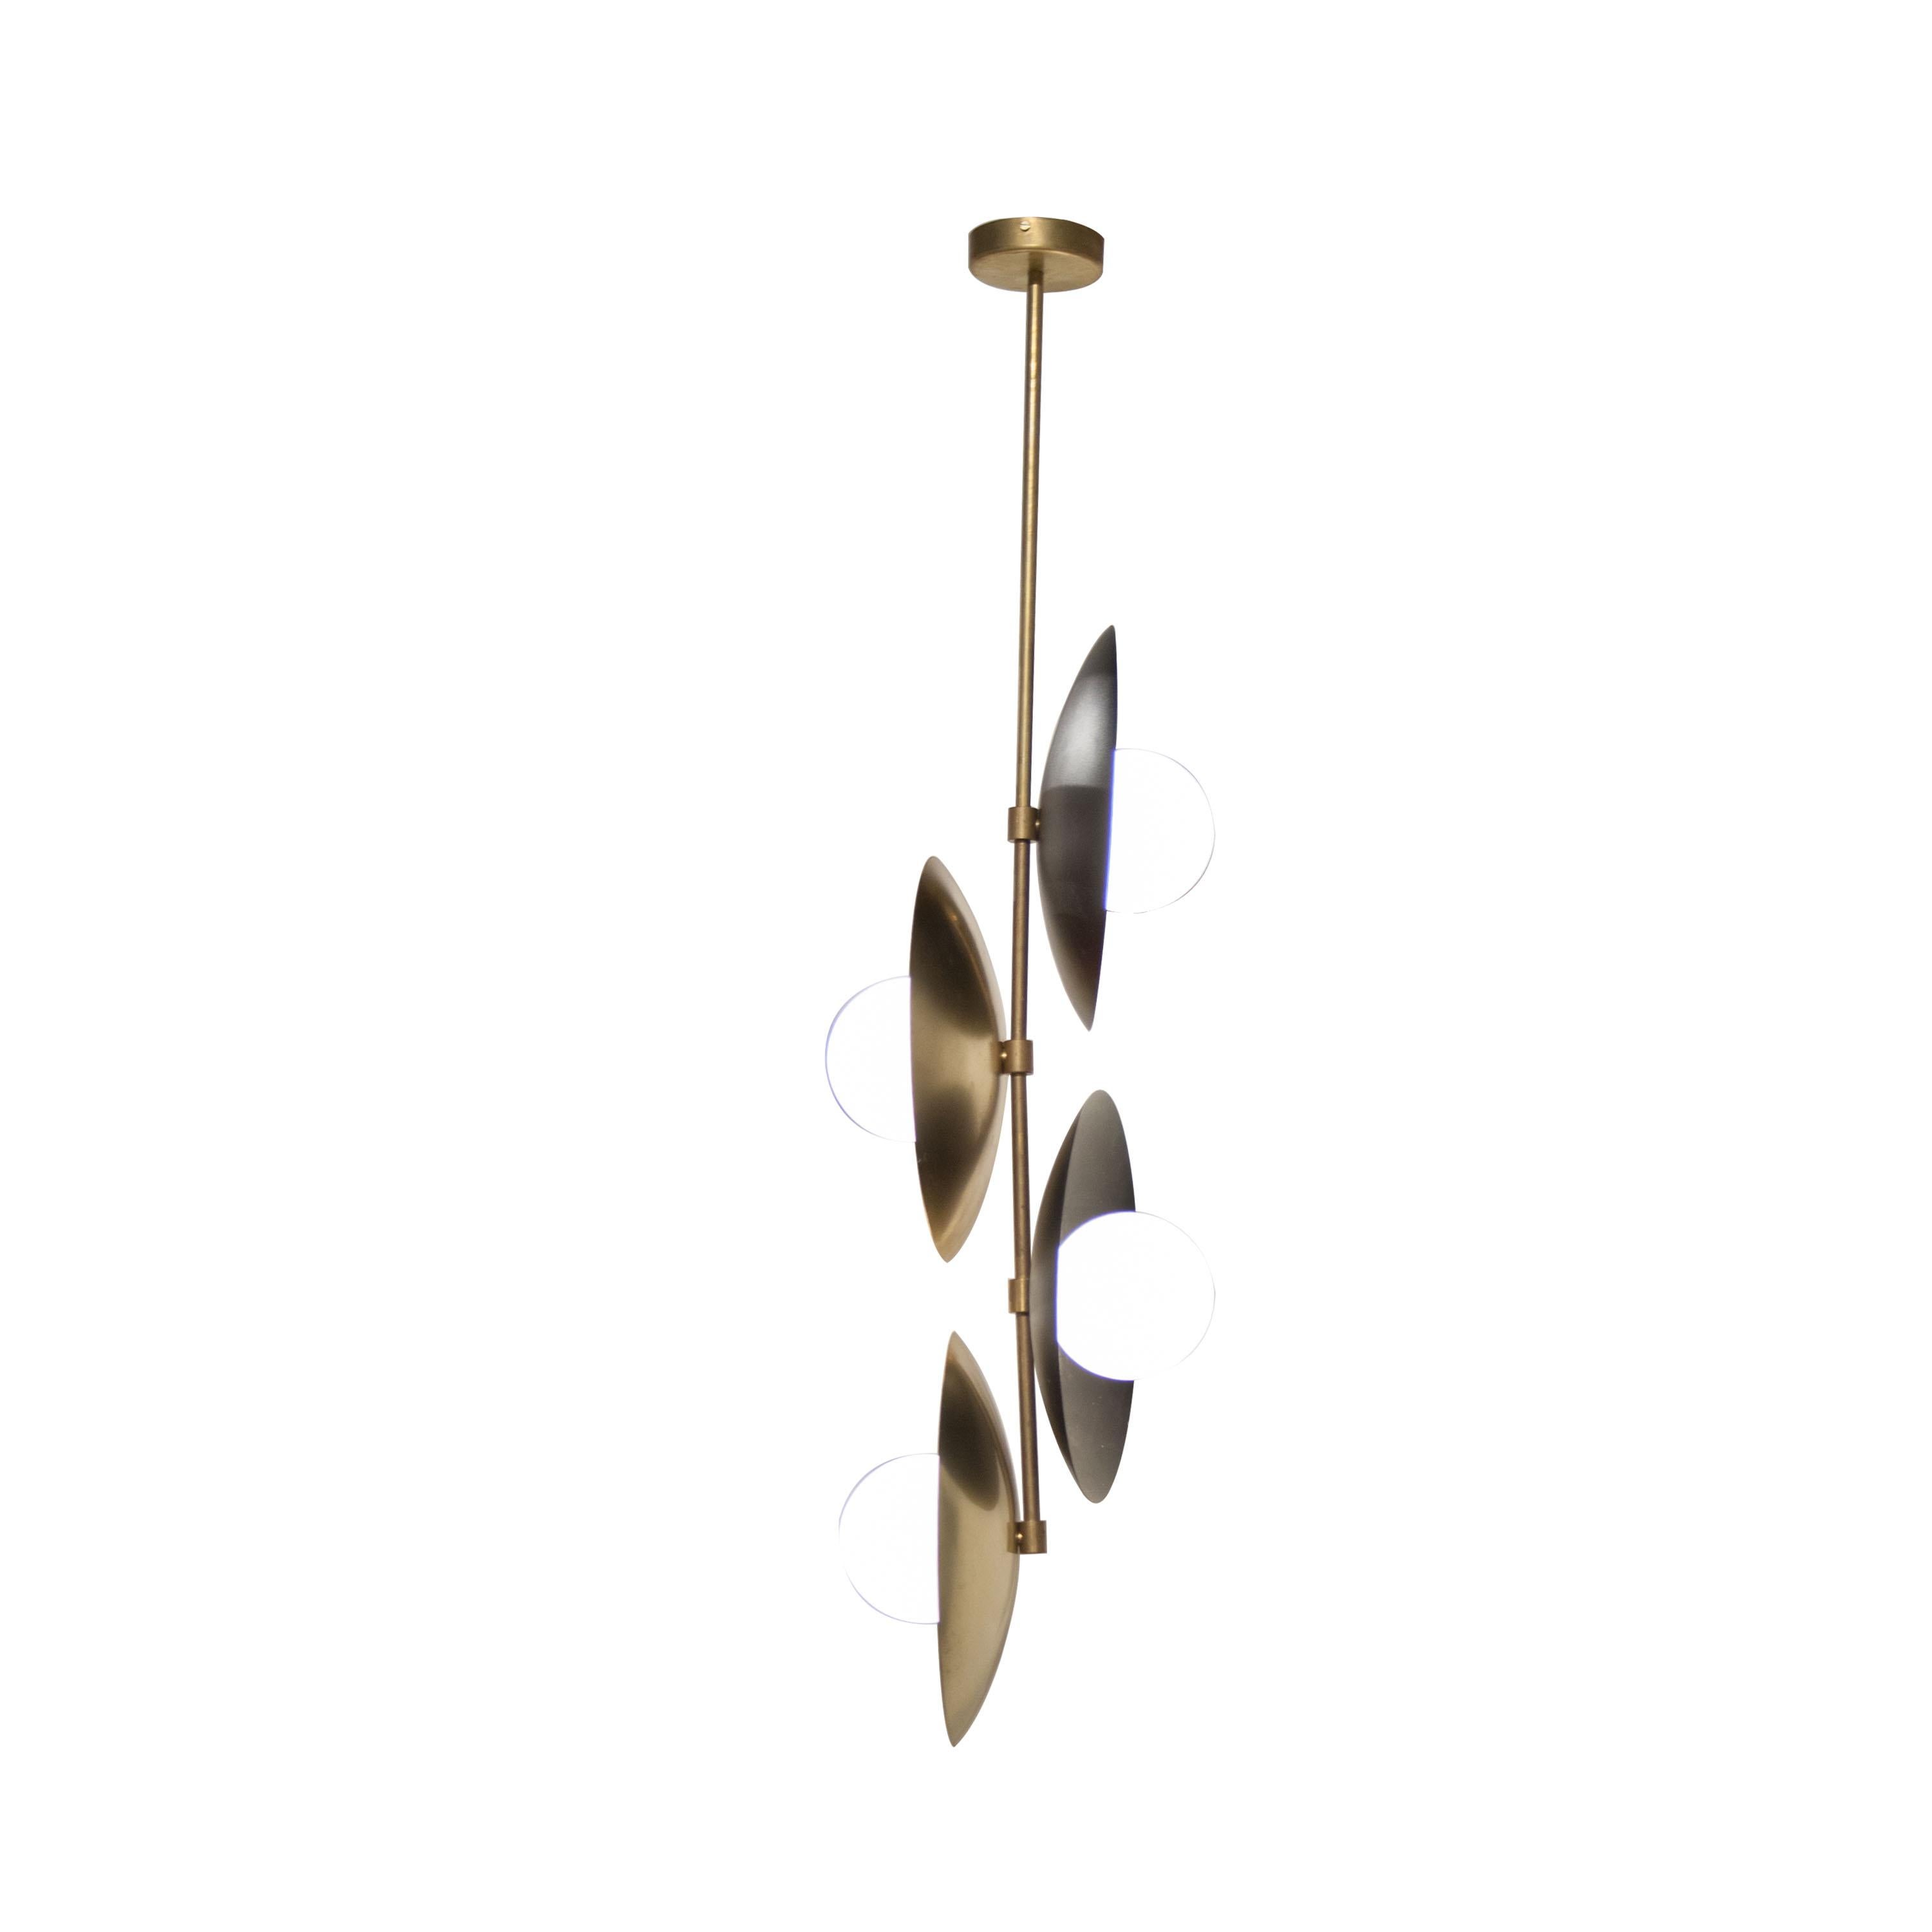 Contemporary suspension vertical lamp, Stilnovo style edition, with brass structure with white glass tulips. Designed by IKB191.